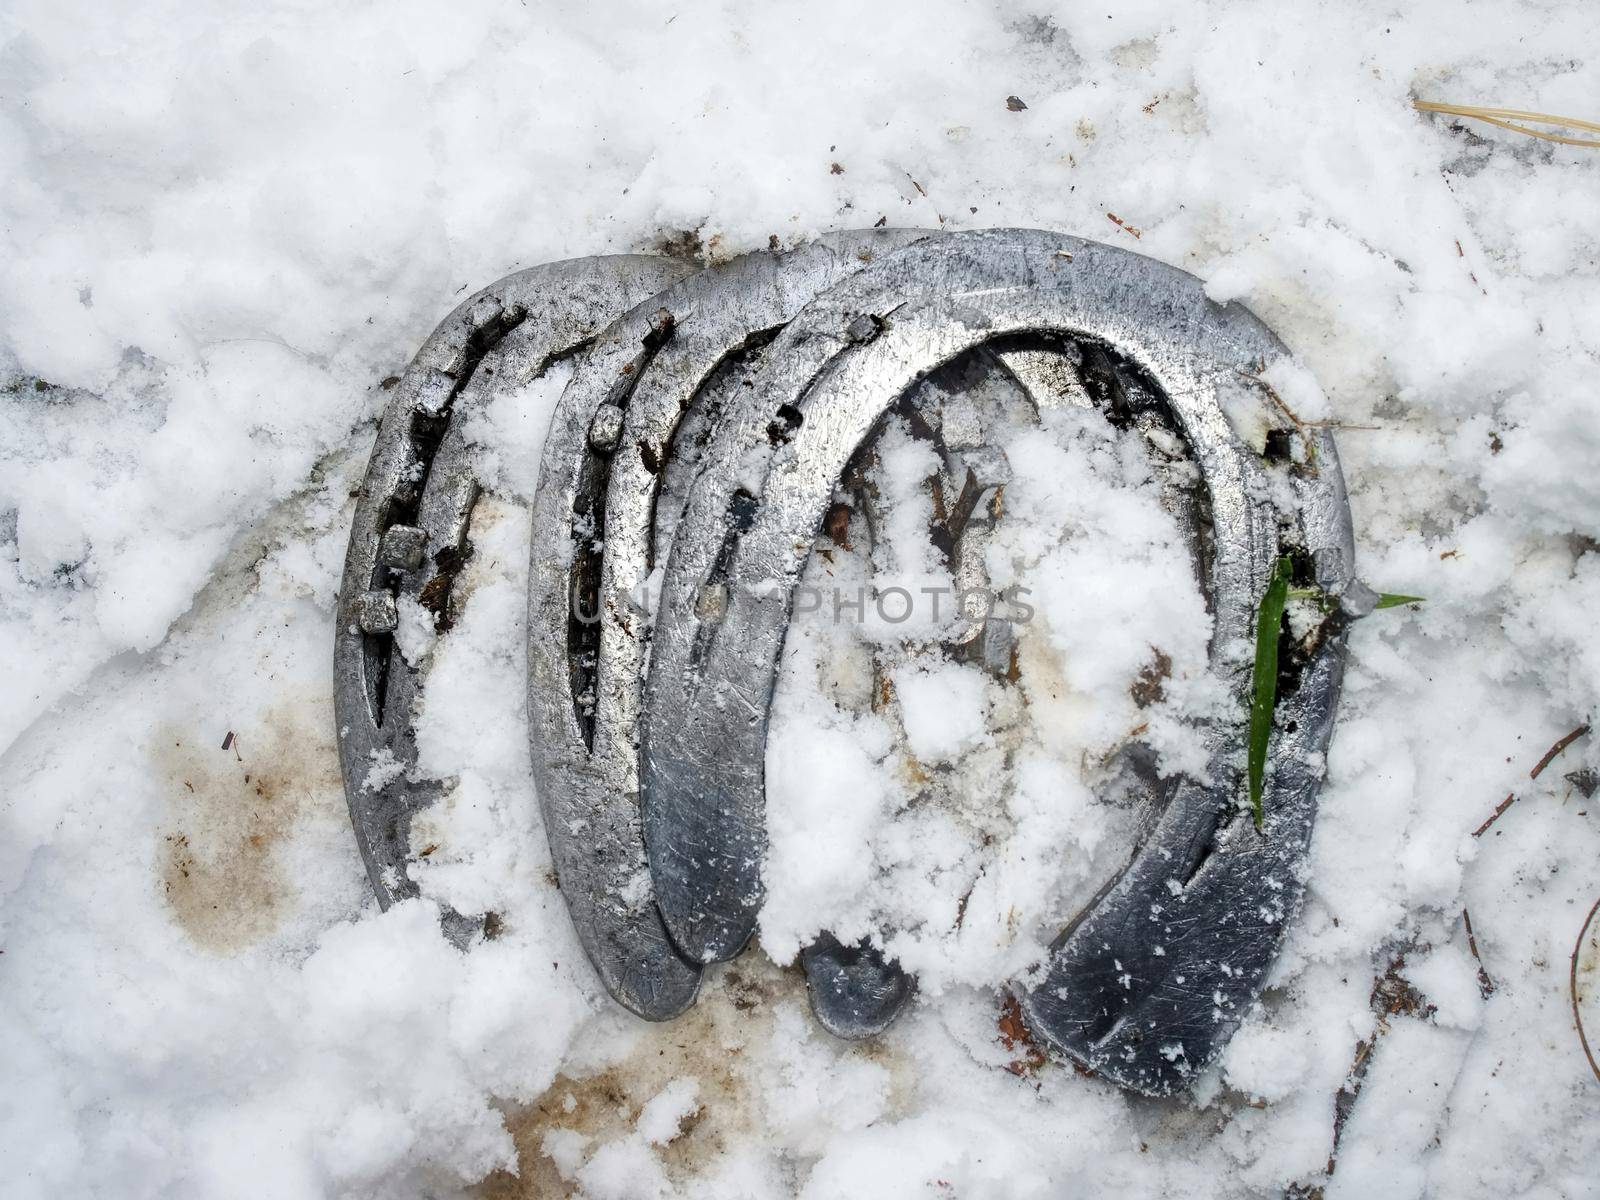 Removing of worn out horseshoes within snowy ground in background. Horse care on village farm. traditional life